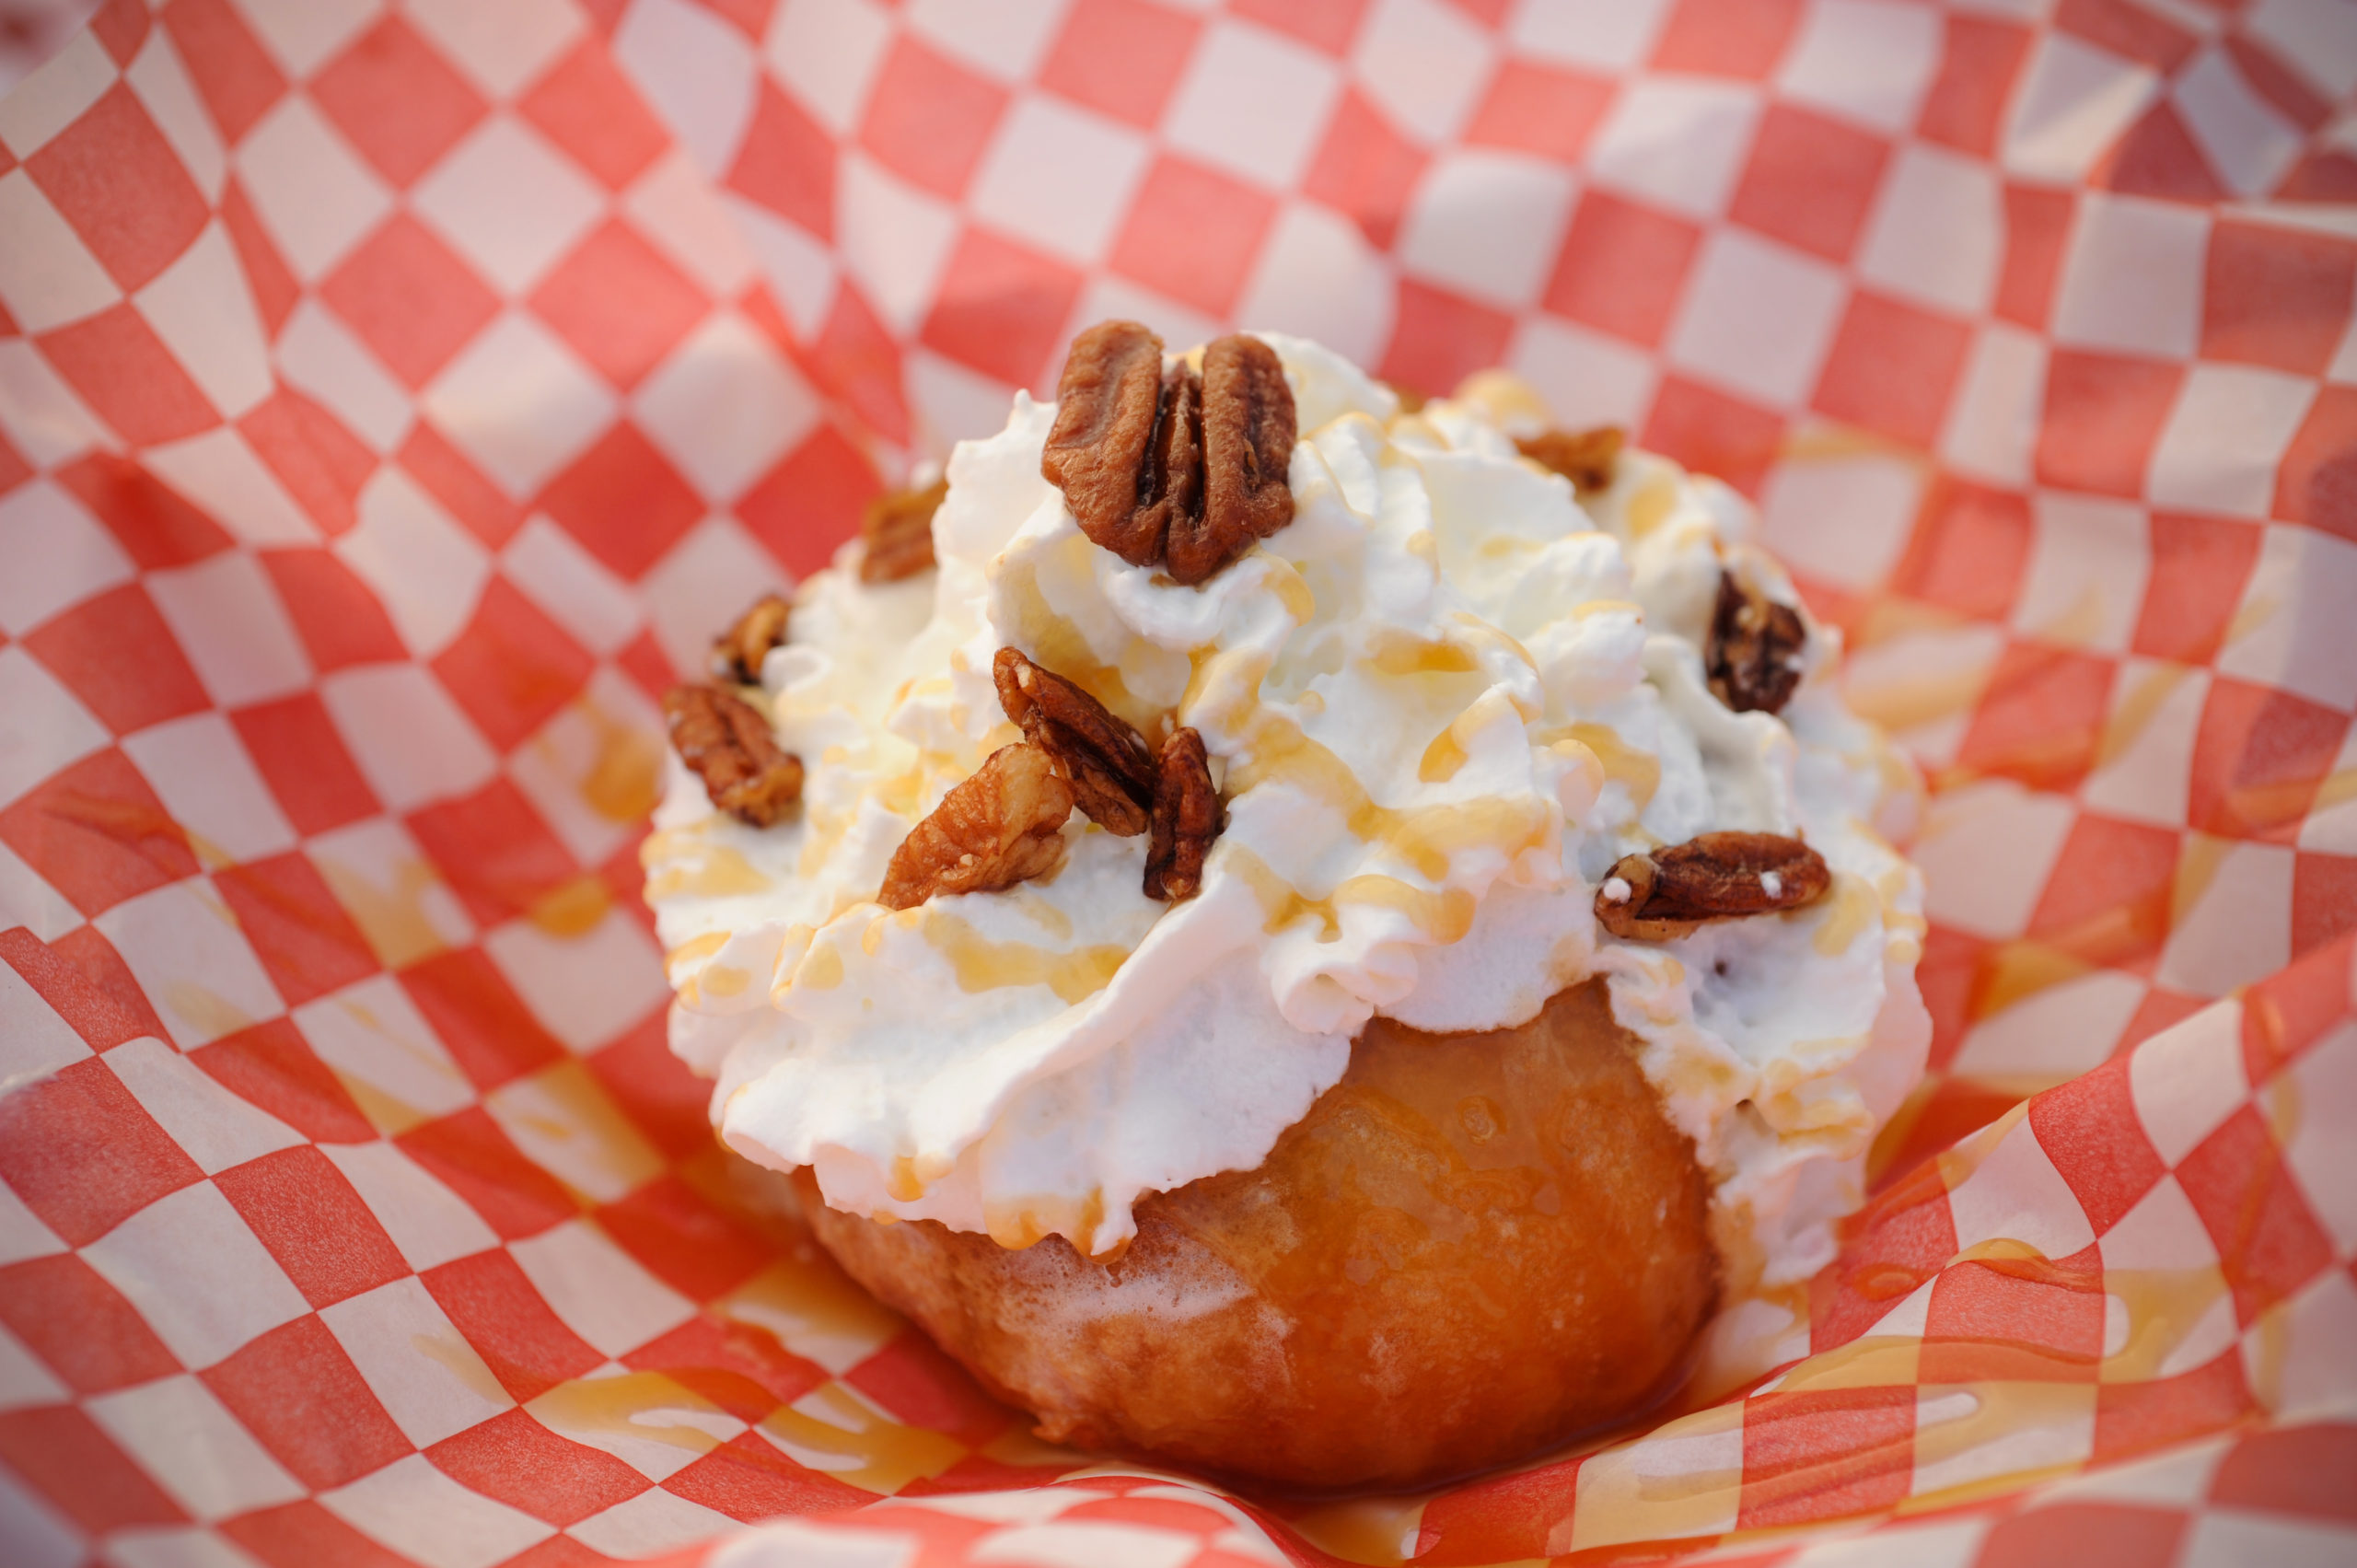 Five Of The Craziest Foods To Try At The Fair State Fair Of Texas